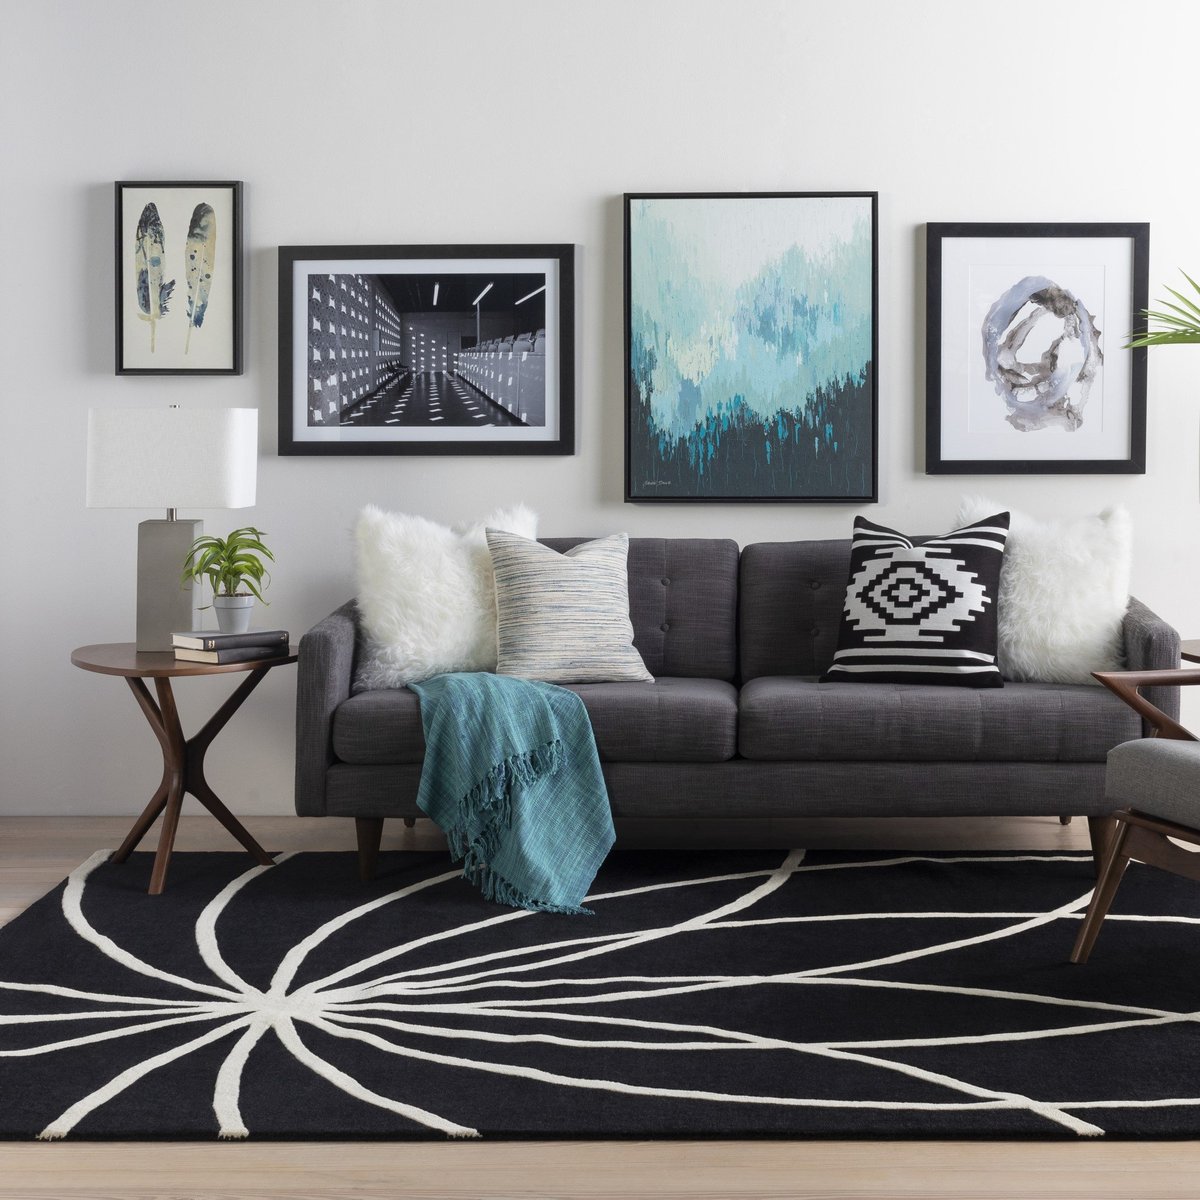 Spa Inspired Tranquility - Black and White Living Room Design Advice